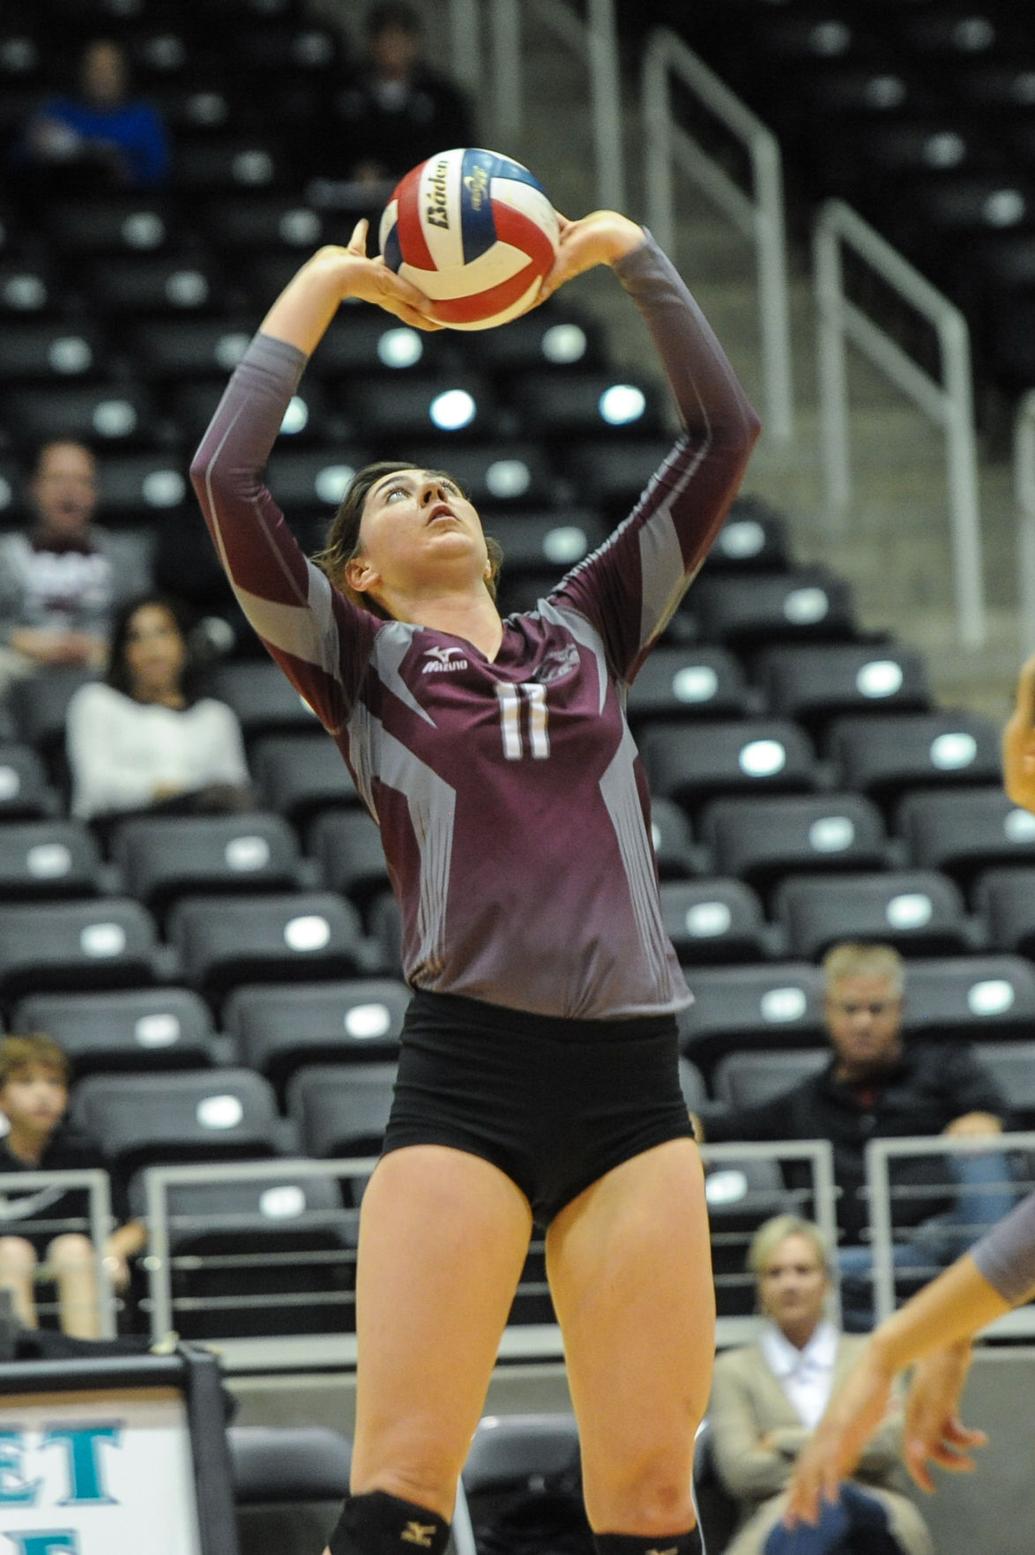 Poteet, Rowlett volleyball players earn Academic AllState